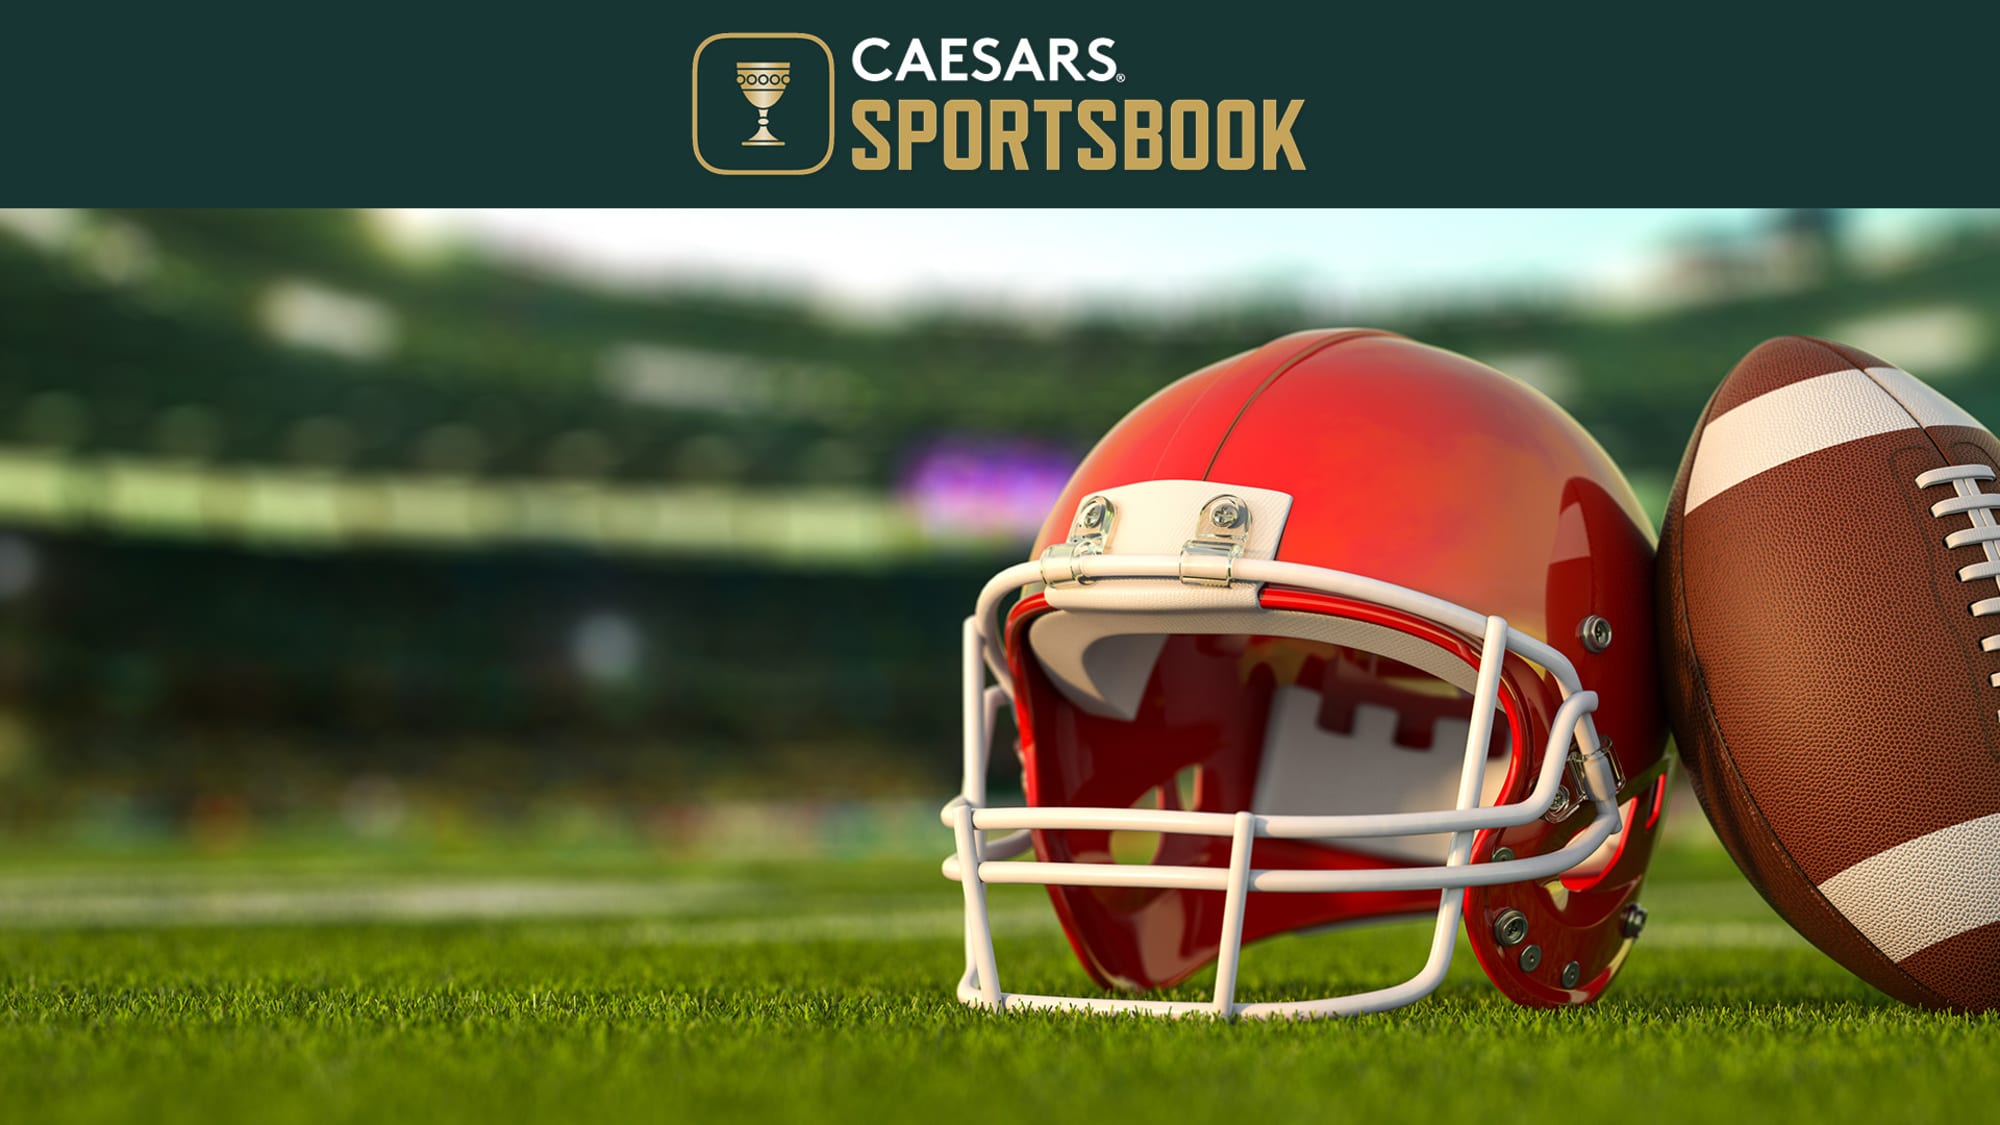 Rebound From Illinois’ Week 3 Loss With $1,000 No-Sweat First Bet at Caesars!